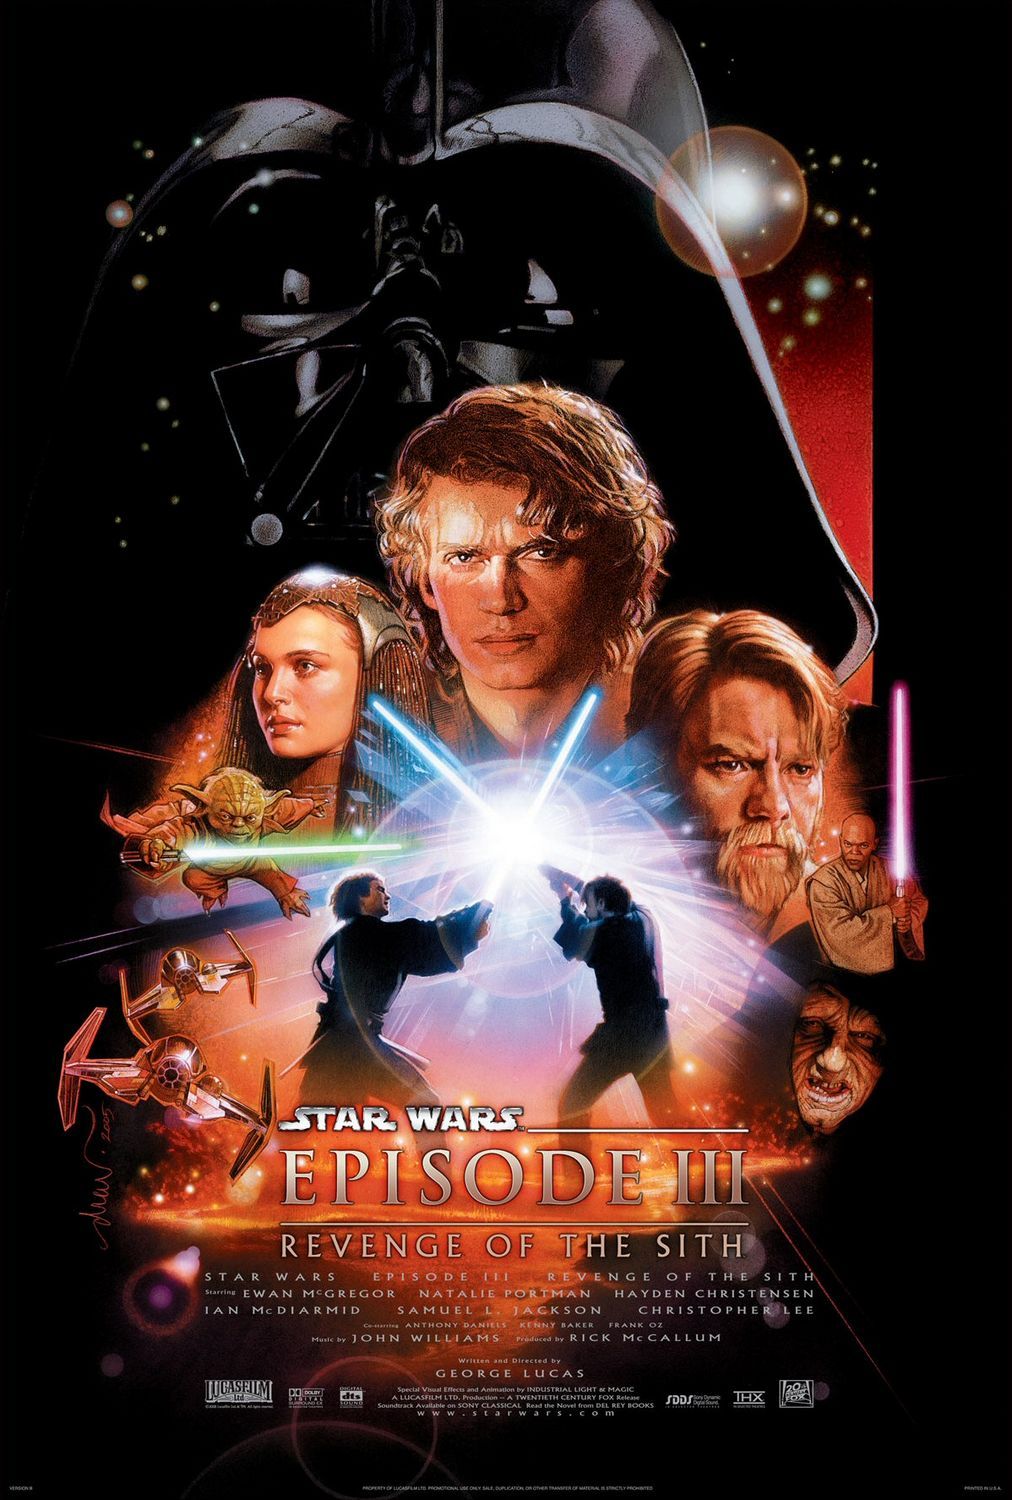 Star Wars Episode III Revenge of the Sith Movie Poster